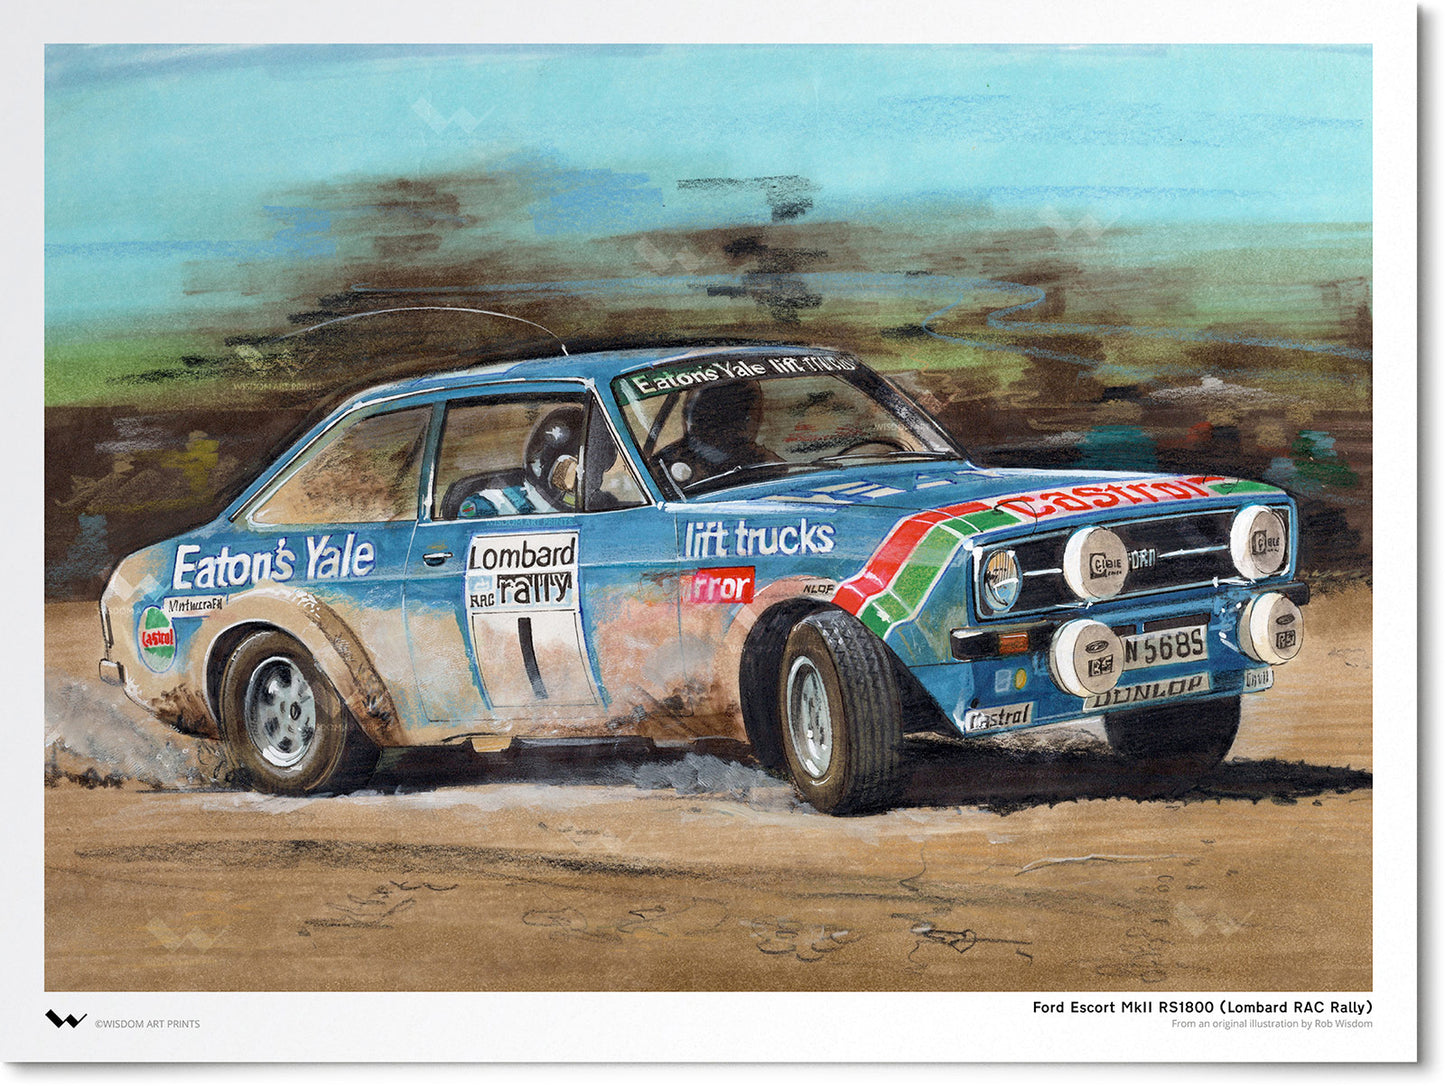 Ford Escort MkII RS1800 (Lombard RAC Rally)